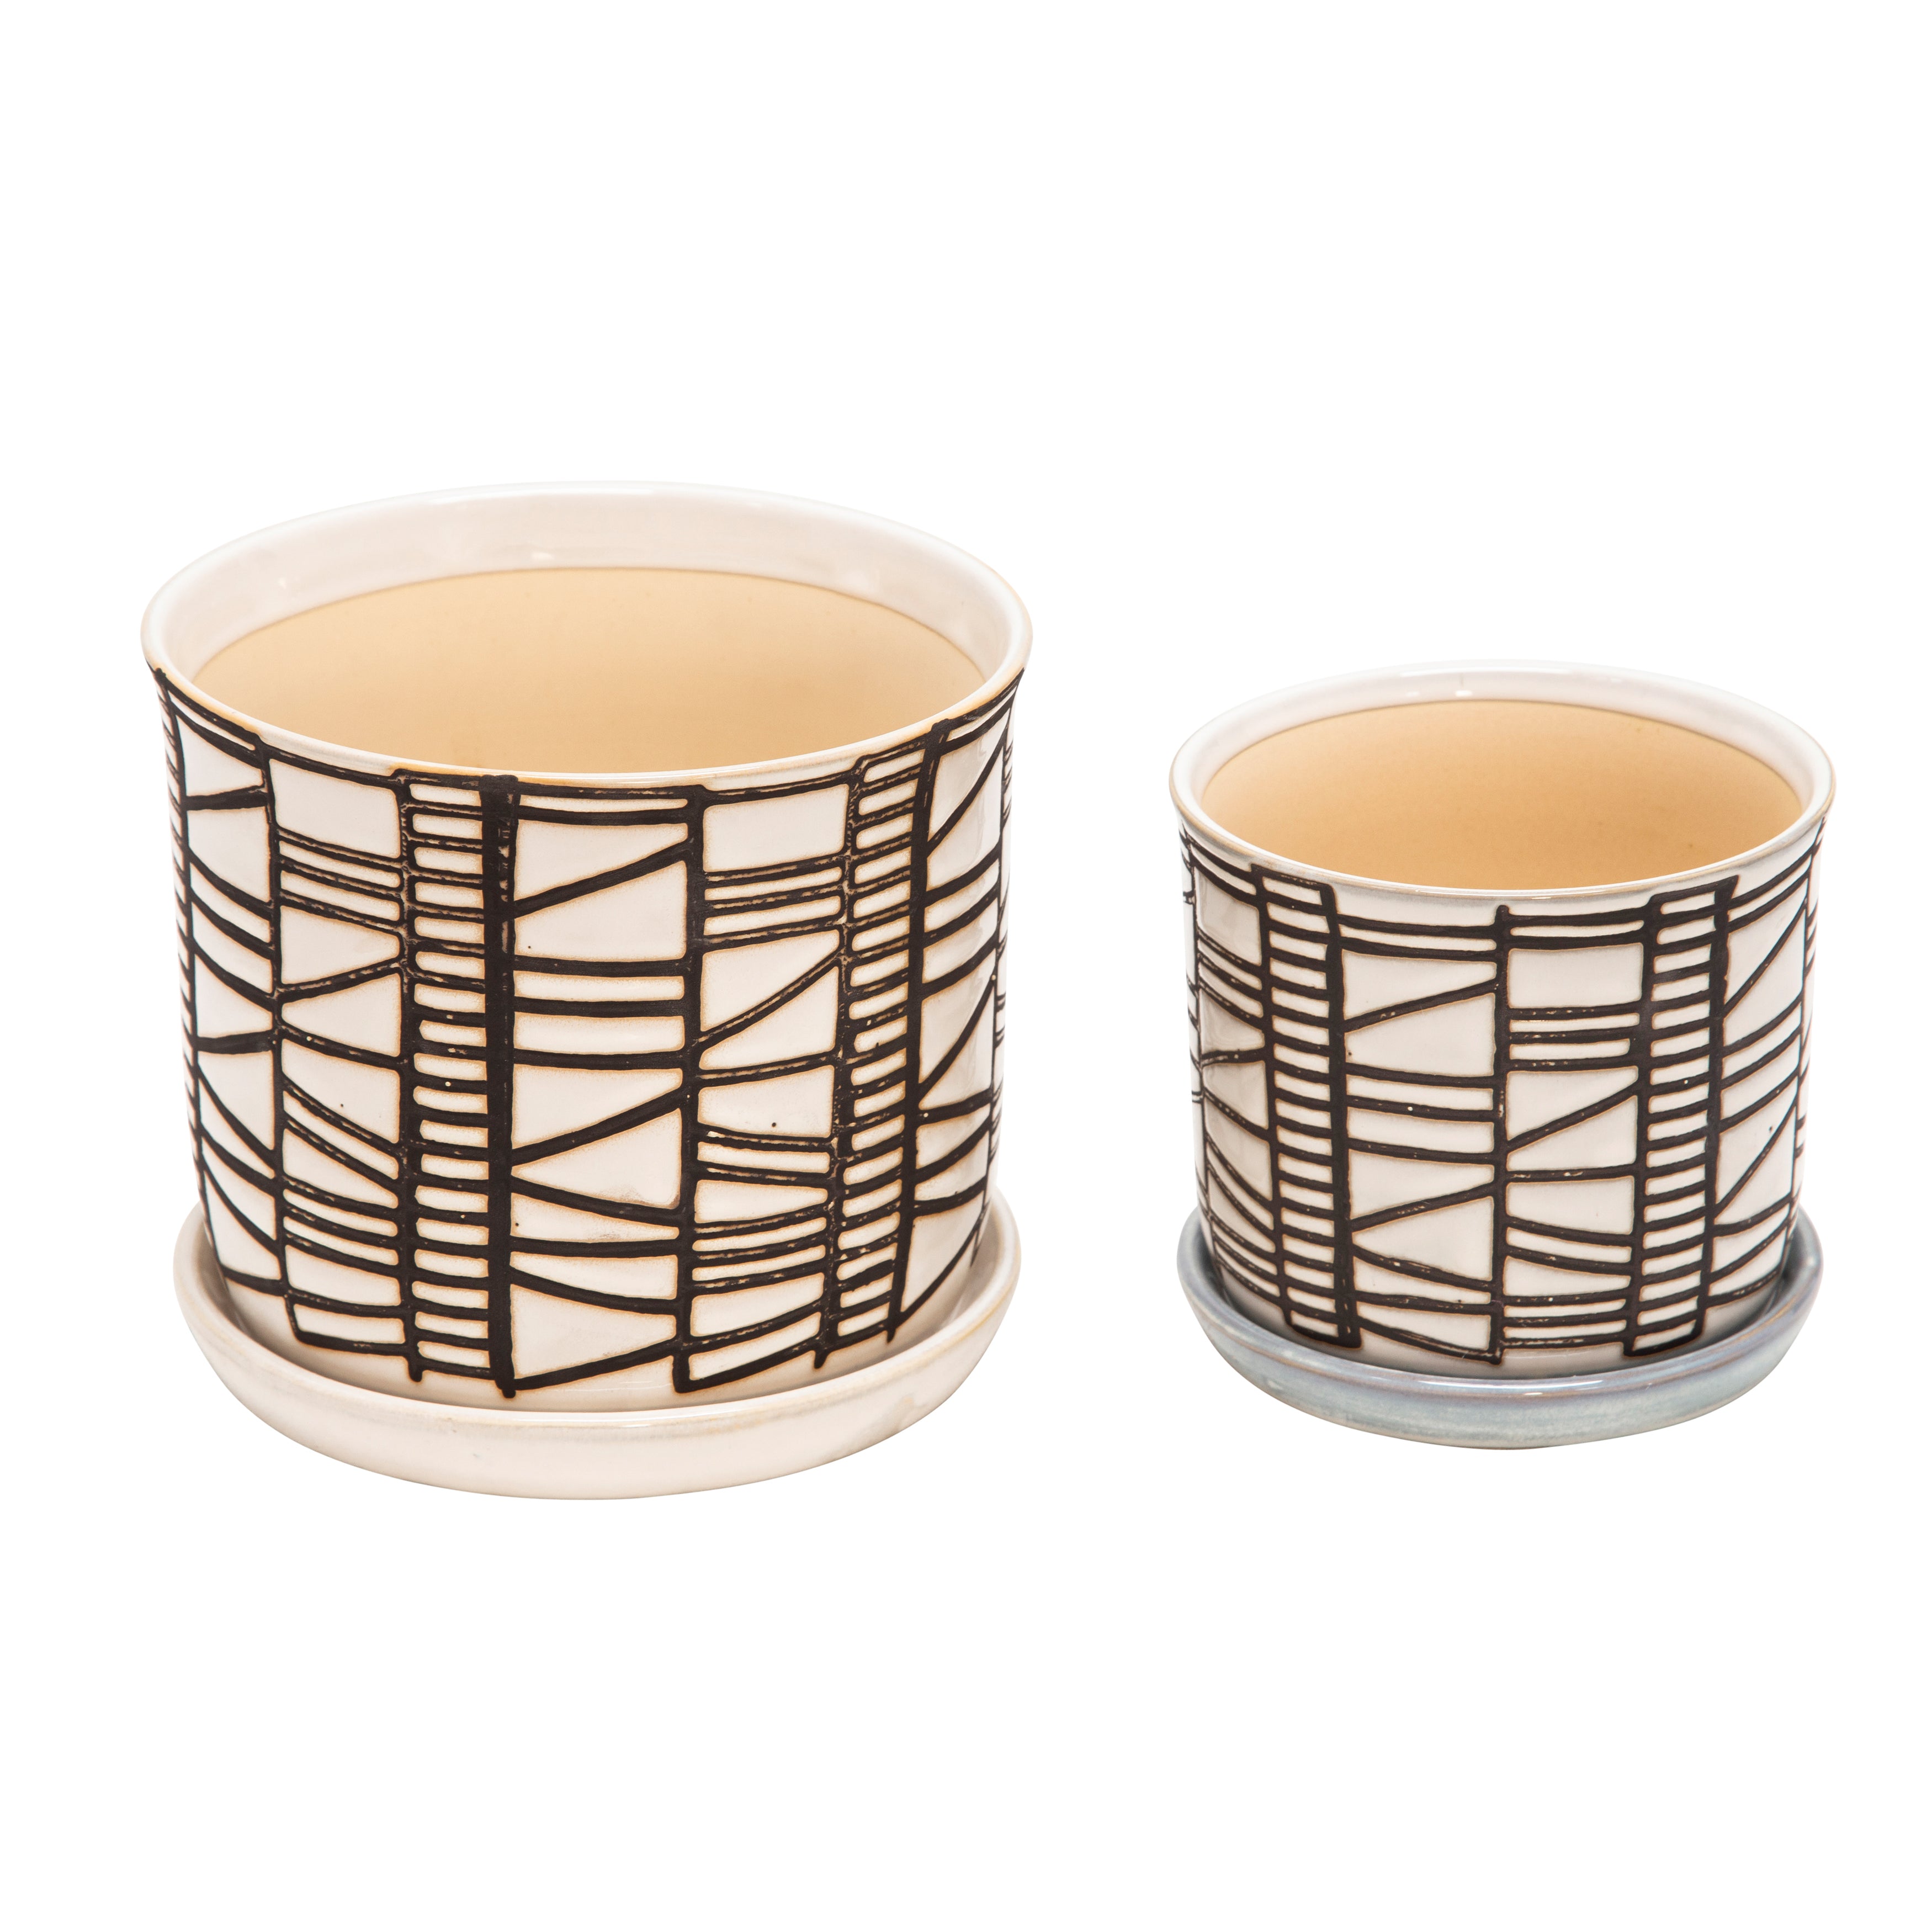 Set of 2 Beige Ceramic Planters with Saucer, Planters